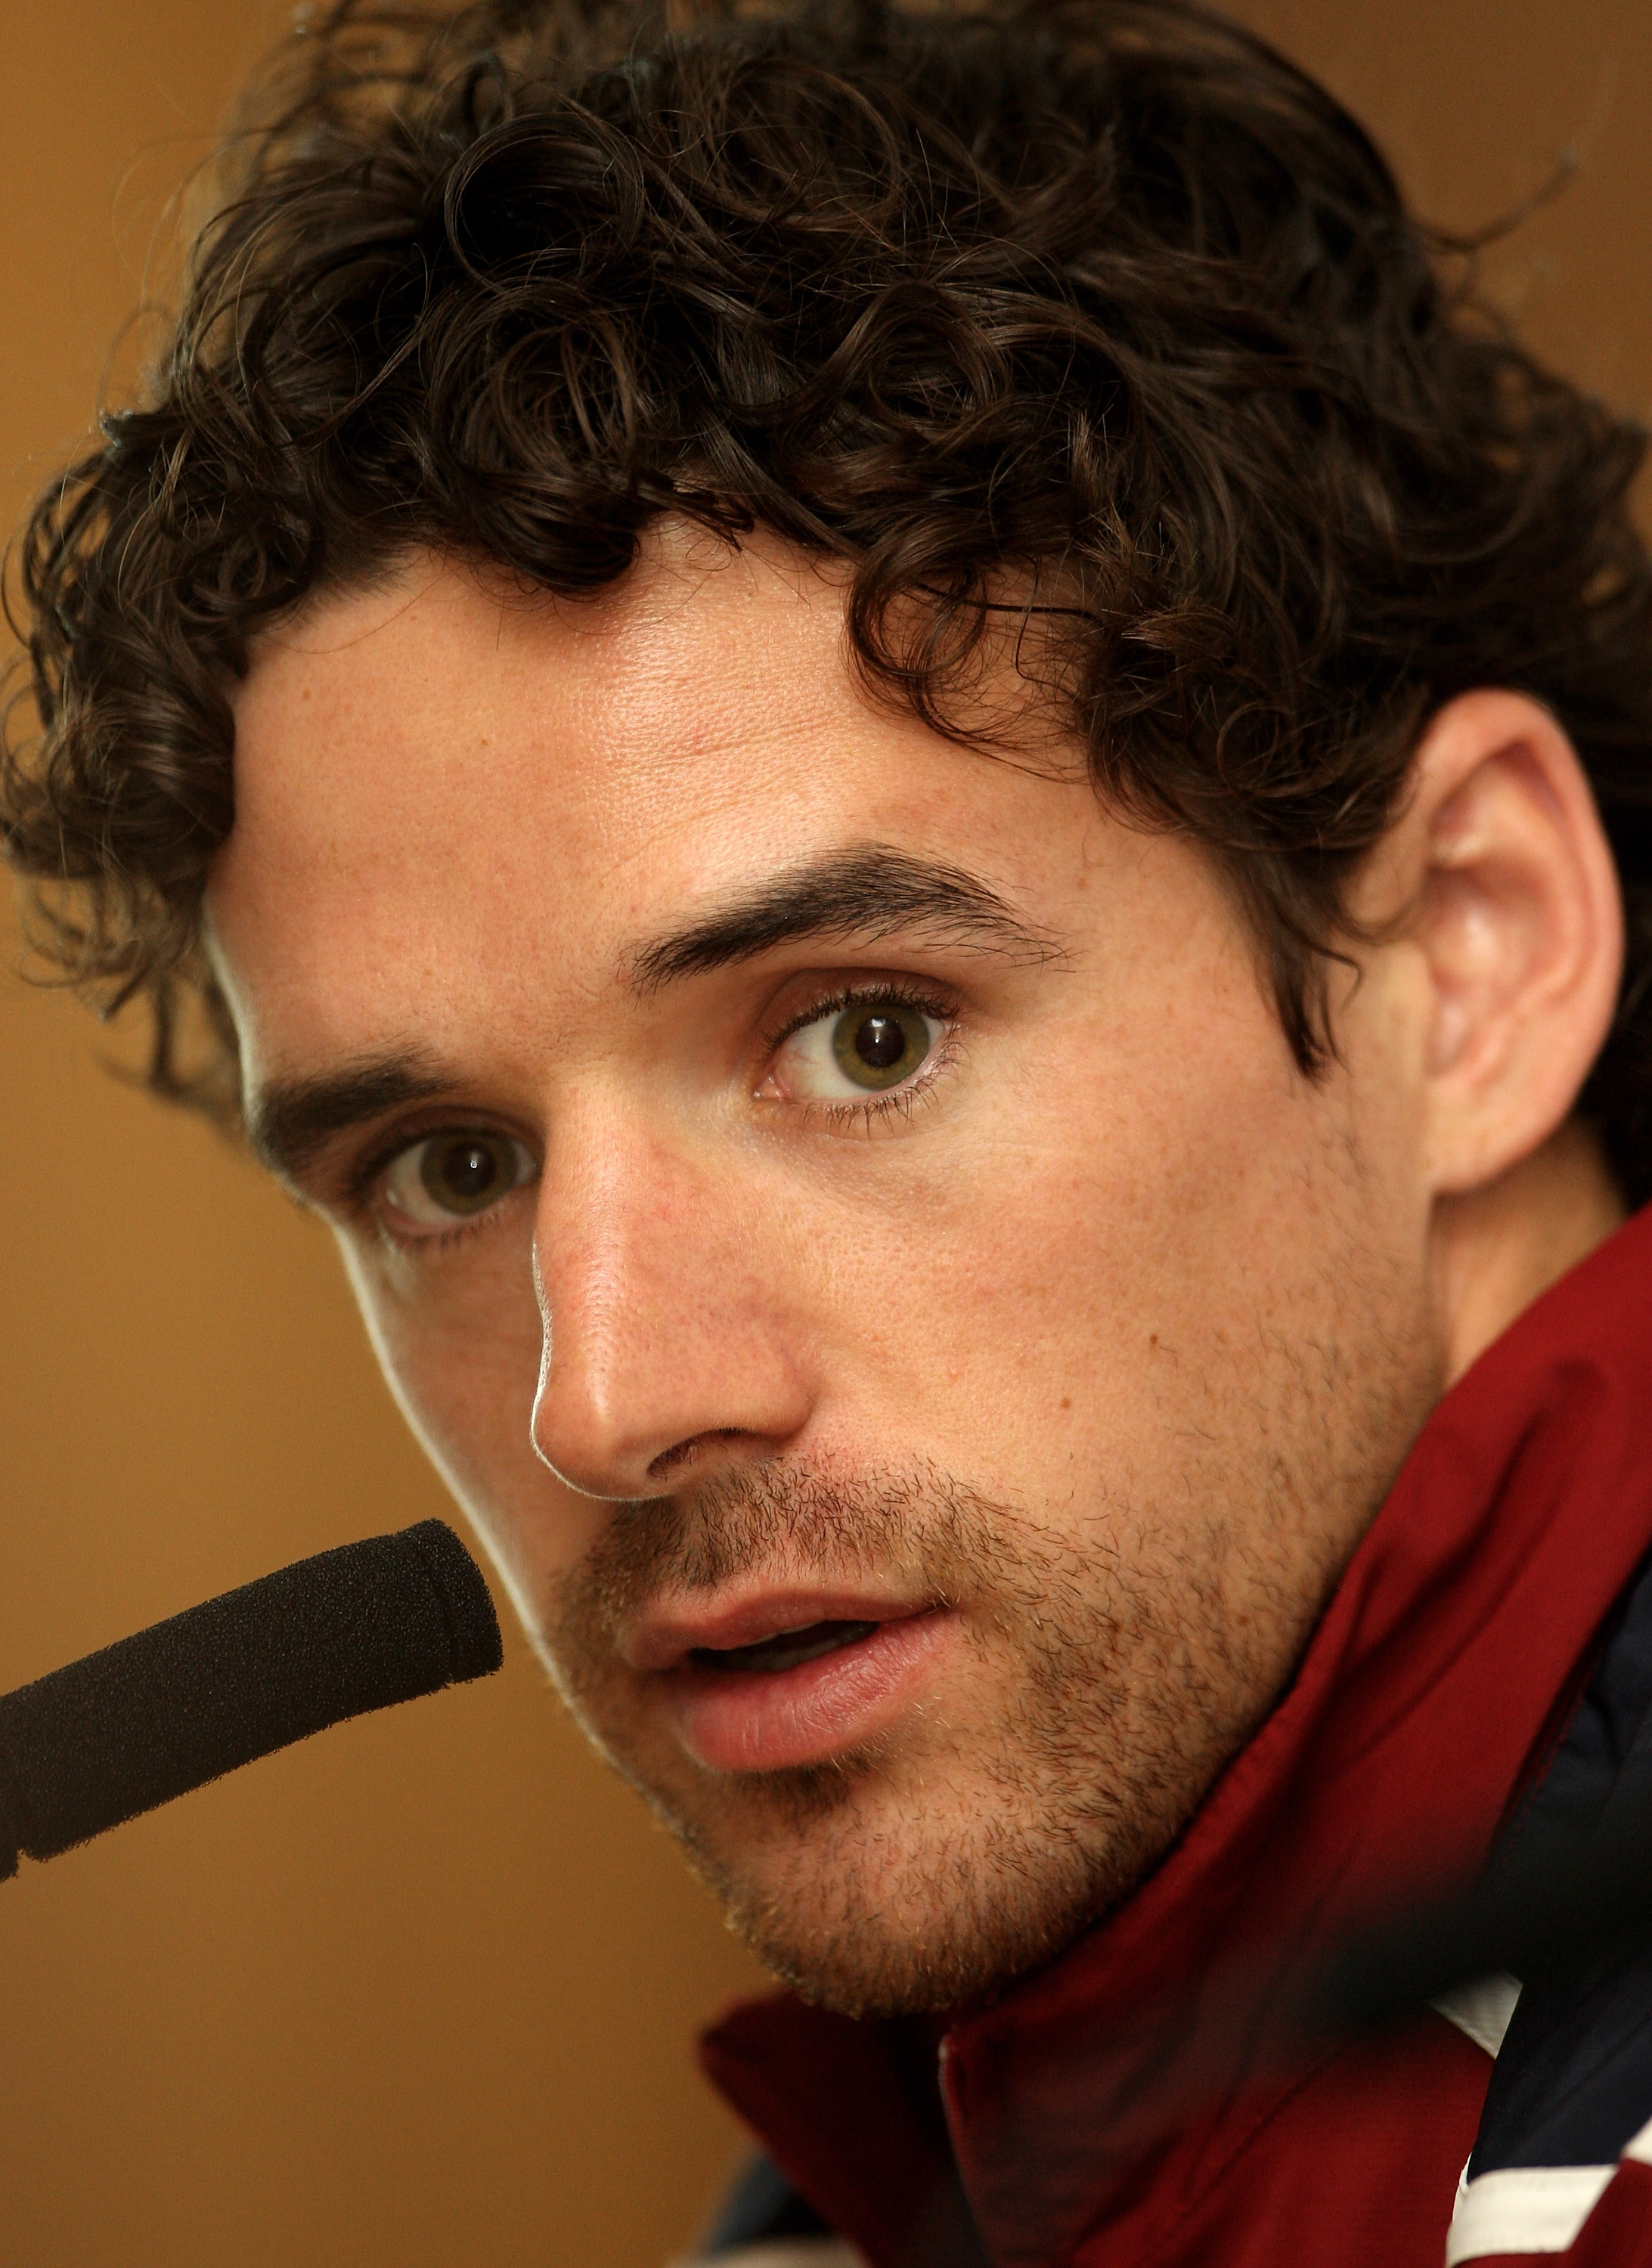 LONDON COLNEY, UNITED KINGDOM - MAY 26:  Owen Hargreaves of England looks on during an England Press Conferance at the Grove on May 26, 2008 in London Colney, England.  (Photo by Phil Cole/Getty Images)